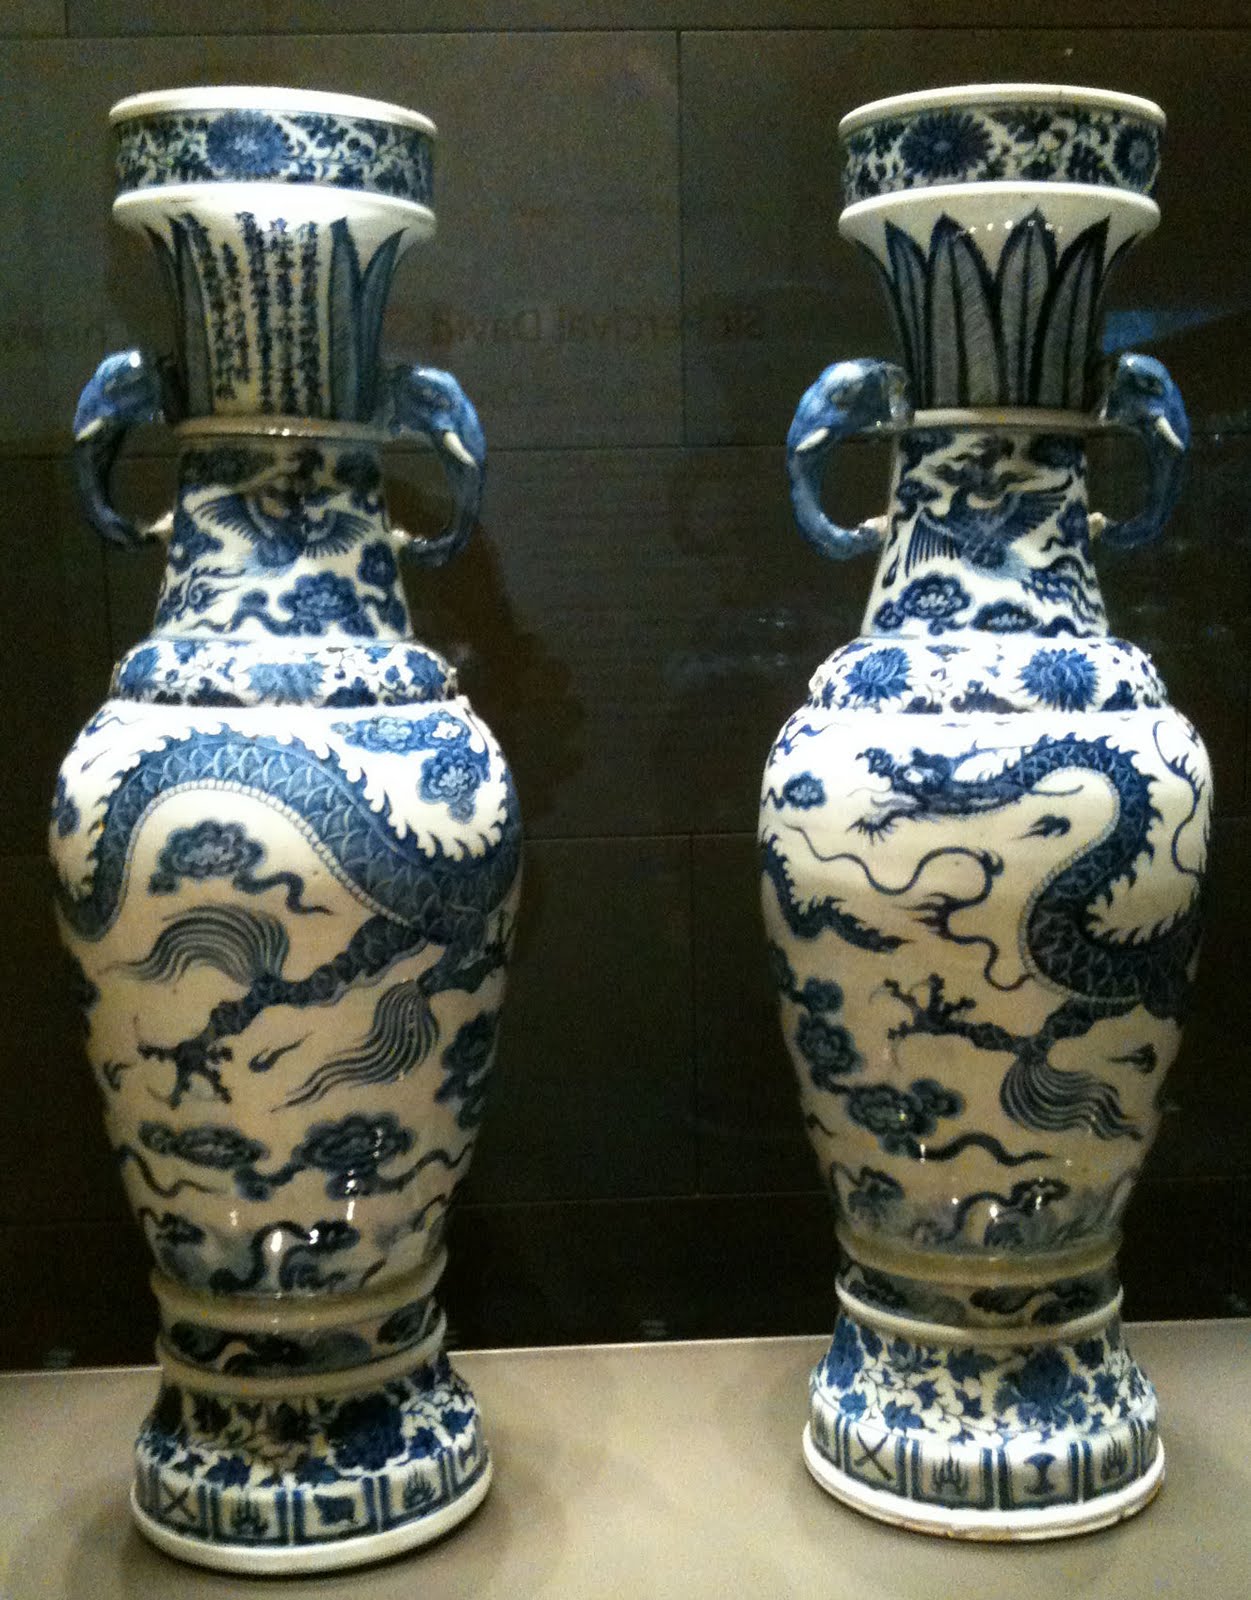 A History of the World in 100 Objects: 64. The David Vases (China, AD 1351)